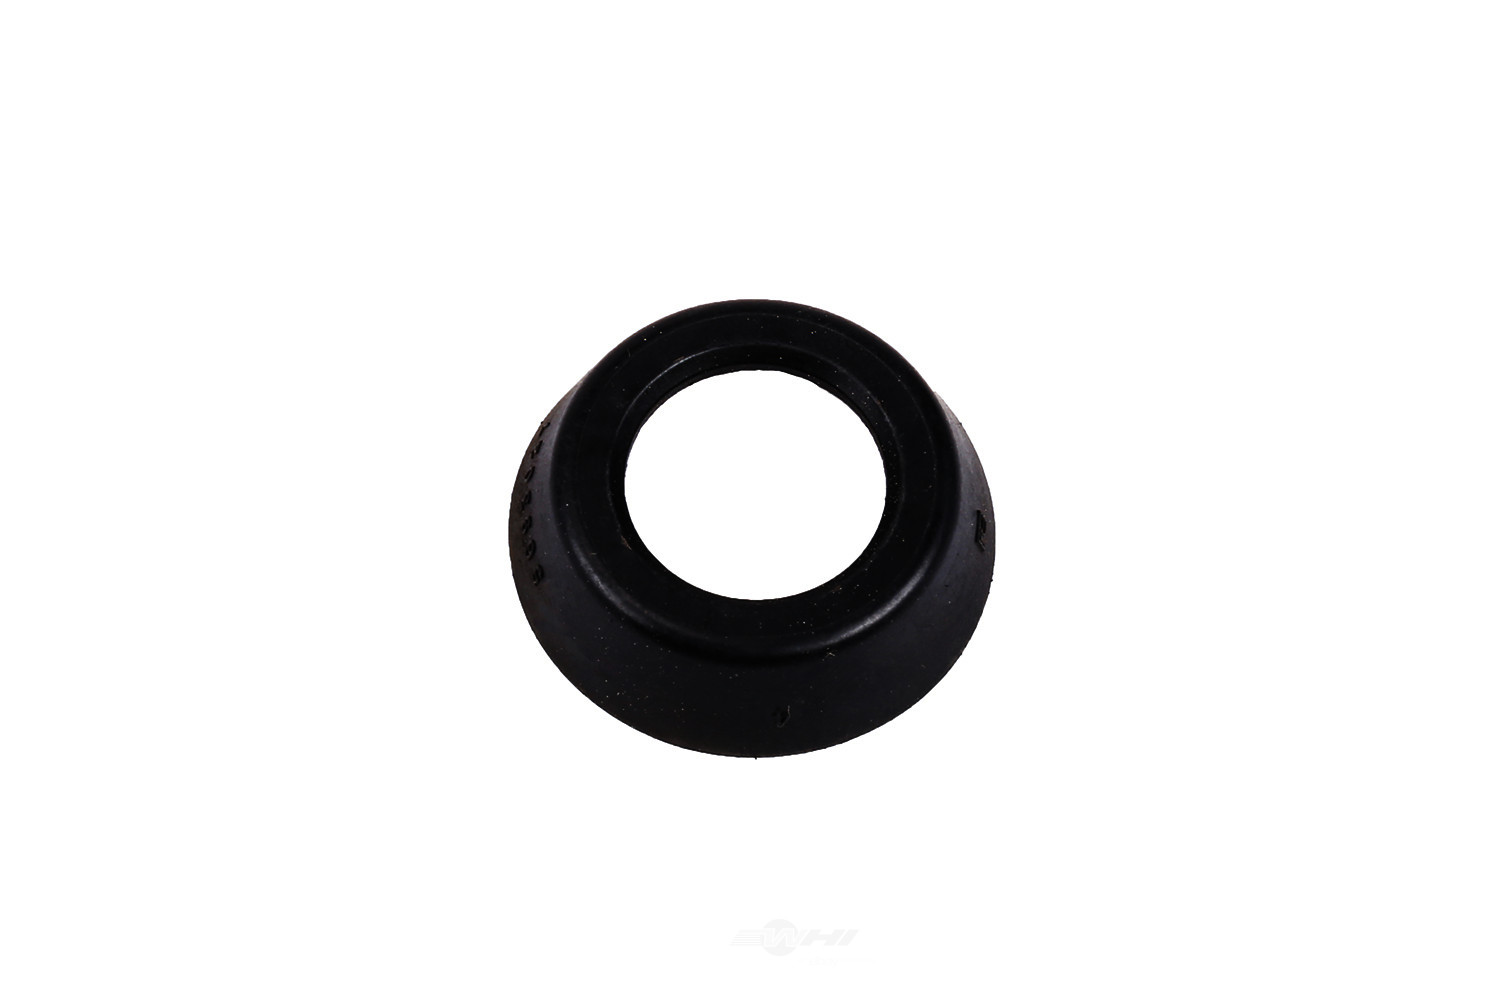 GM GENUINE PARTS - Steering Center Link Bushing - GMP 05693027